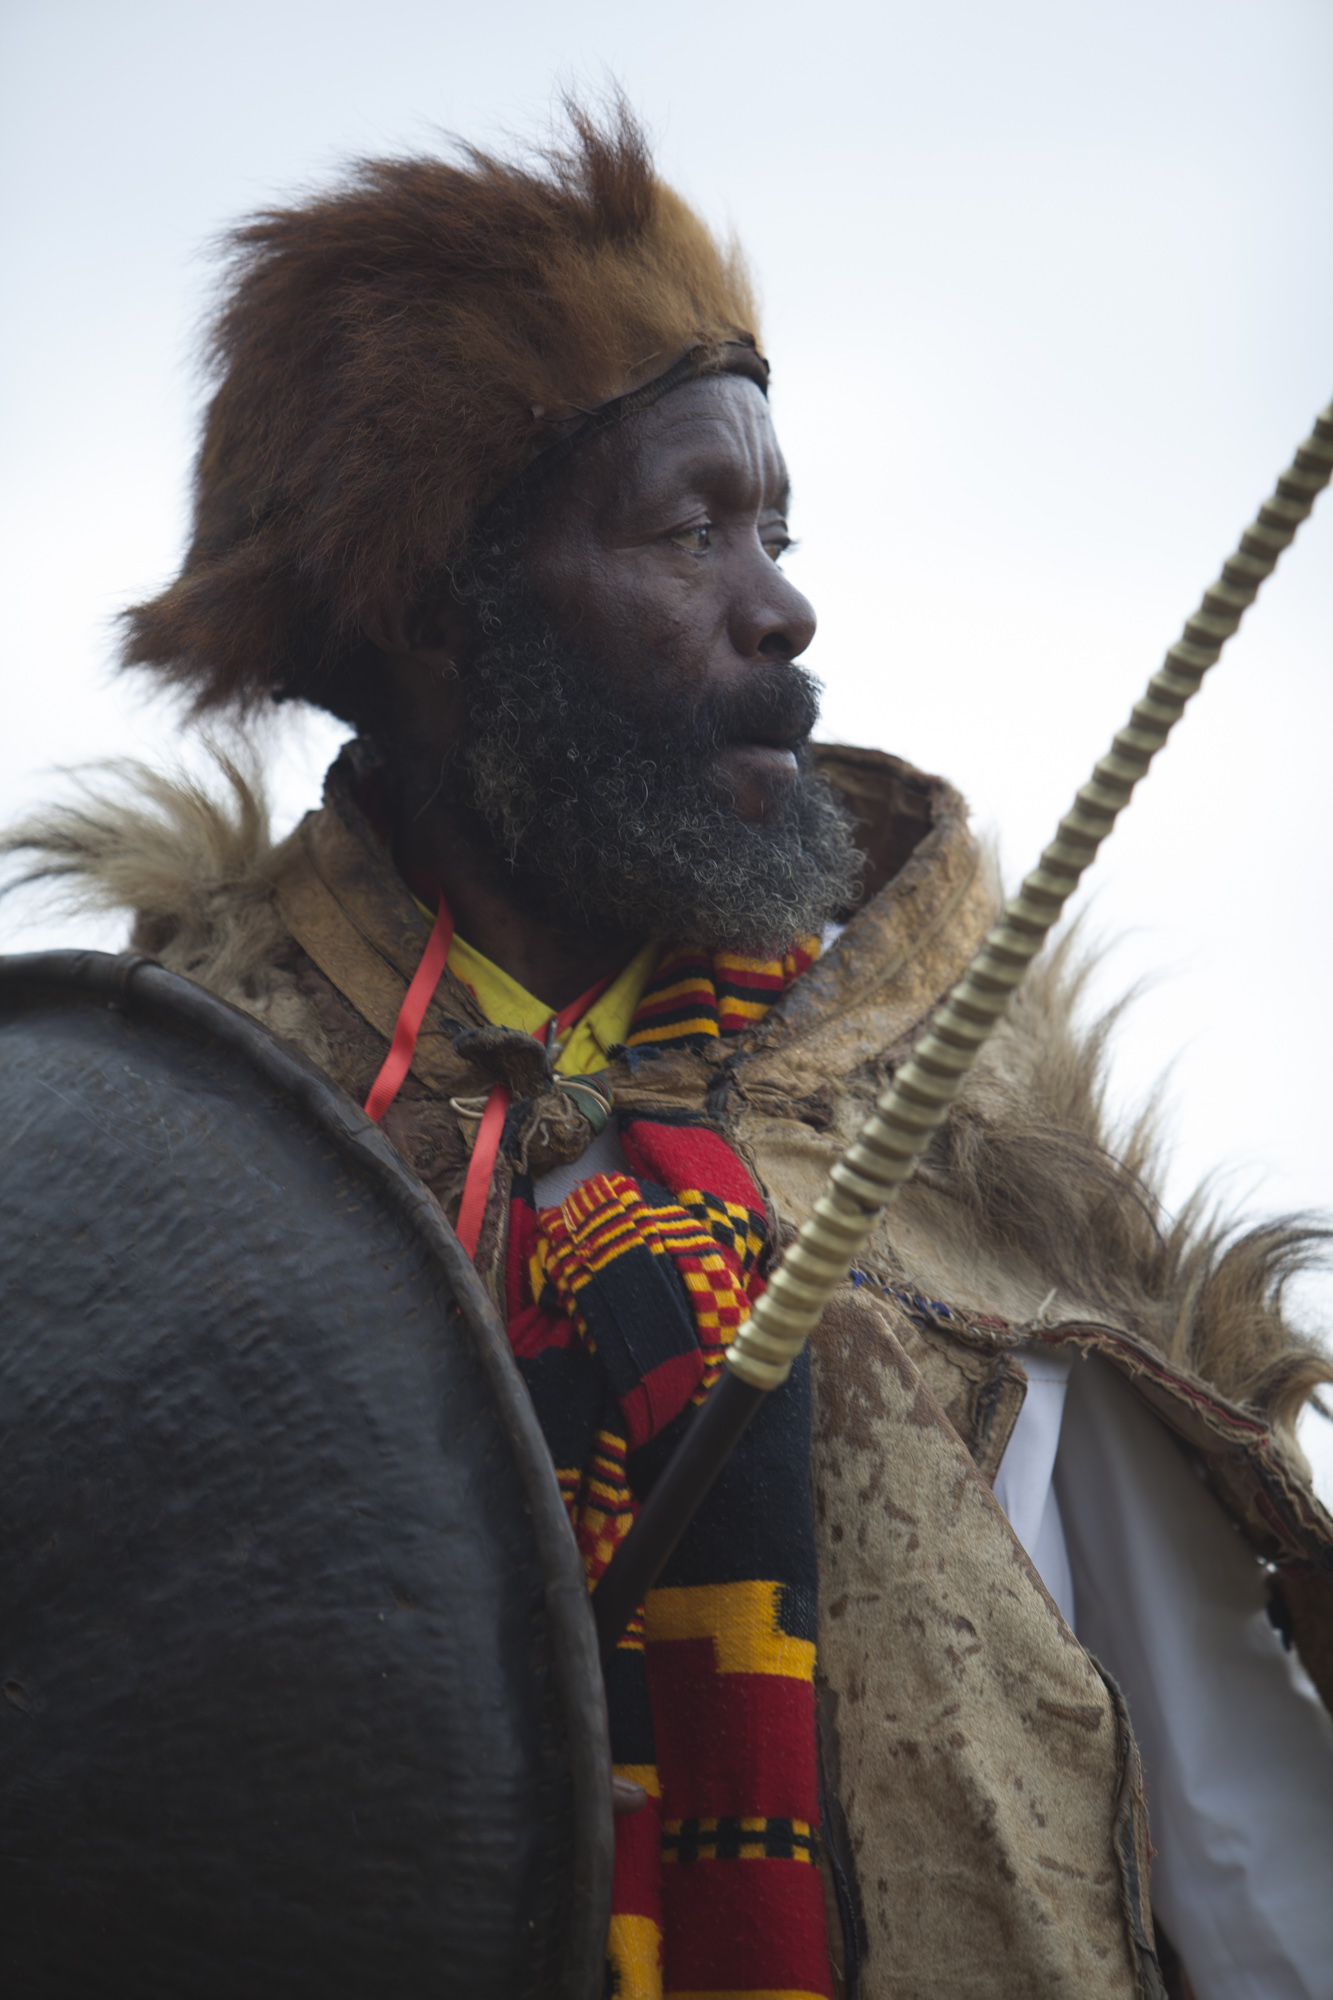  A man is pictured in traditional Dorze clothing during the 50 year anniversary celebration of the formation of Arba Minch town, part of the Southerm Nation’s Nationalities and Peoples region of Ethiopia, on September 6 2014. Arba Minch celebrated it